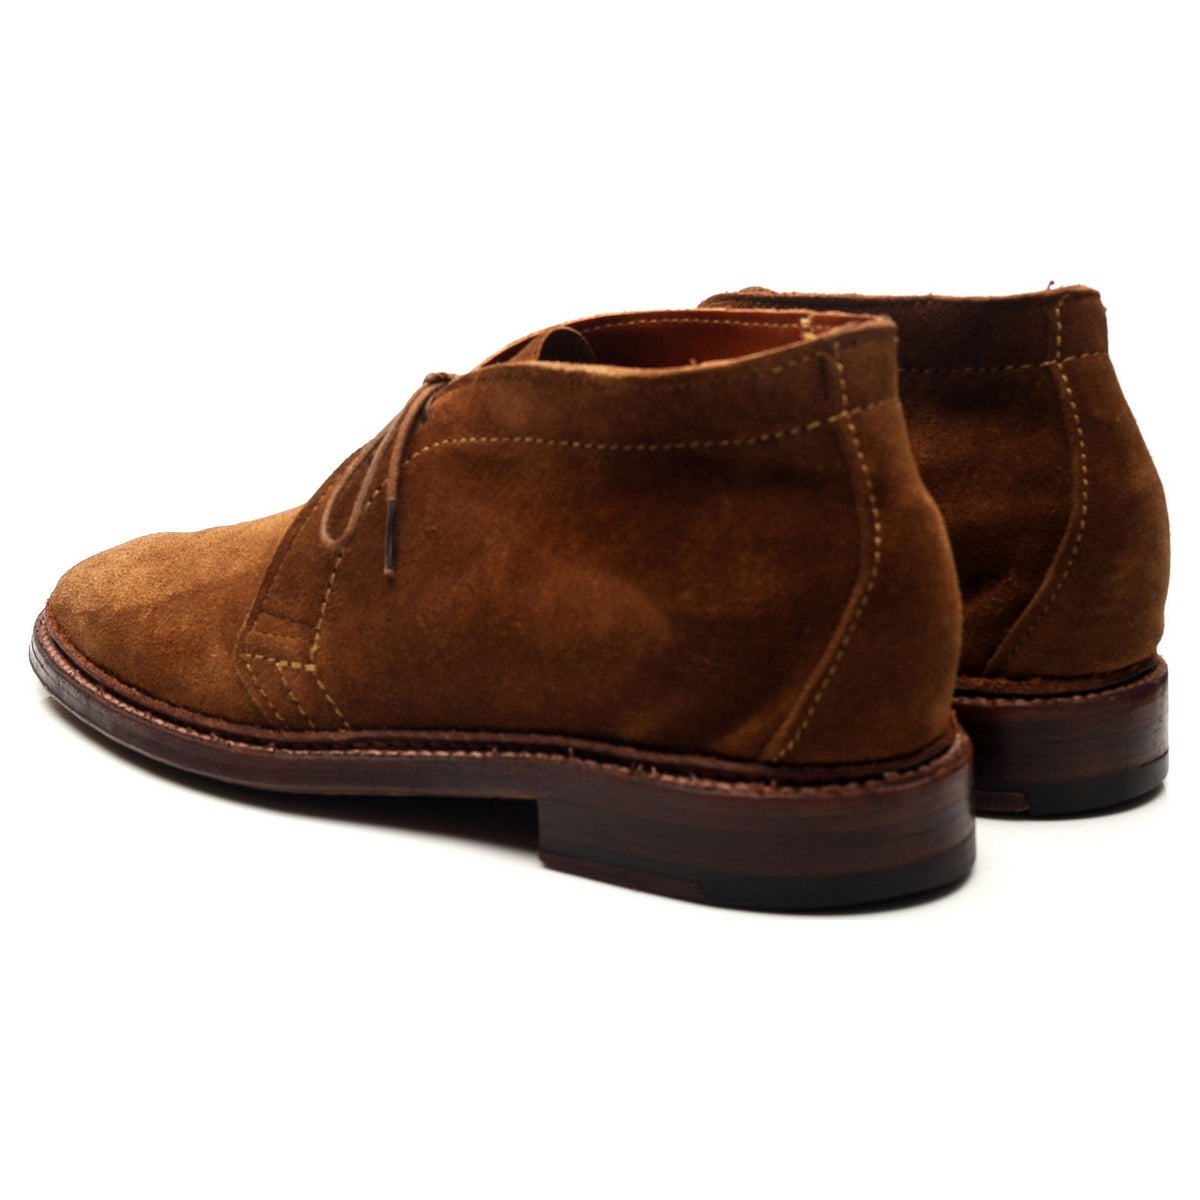 Snuff Brown Suede Chukka Boots UK 7.5 US 8